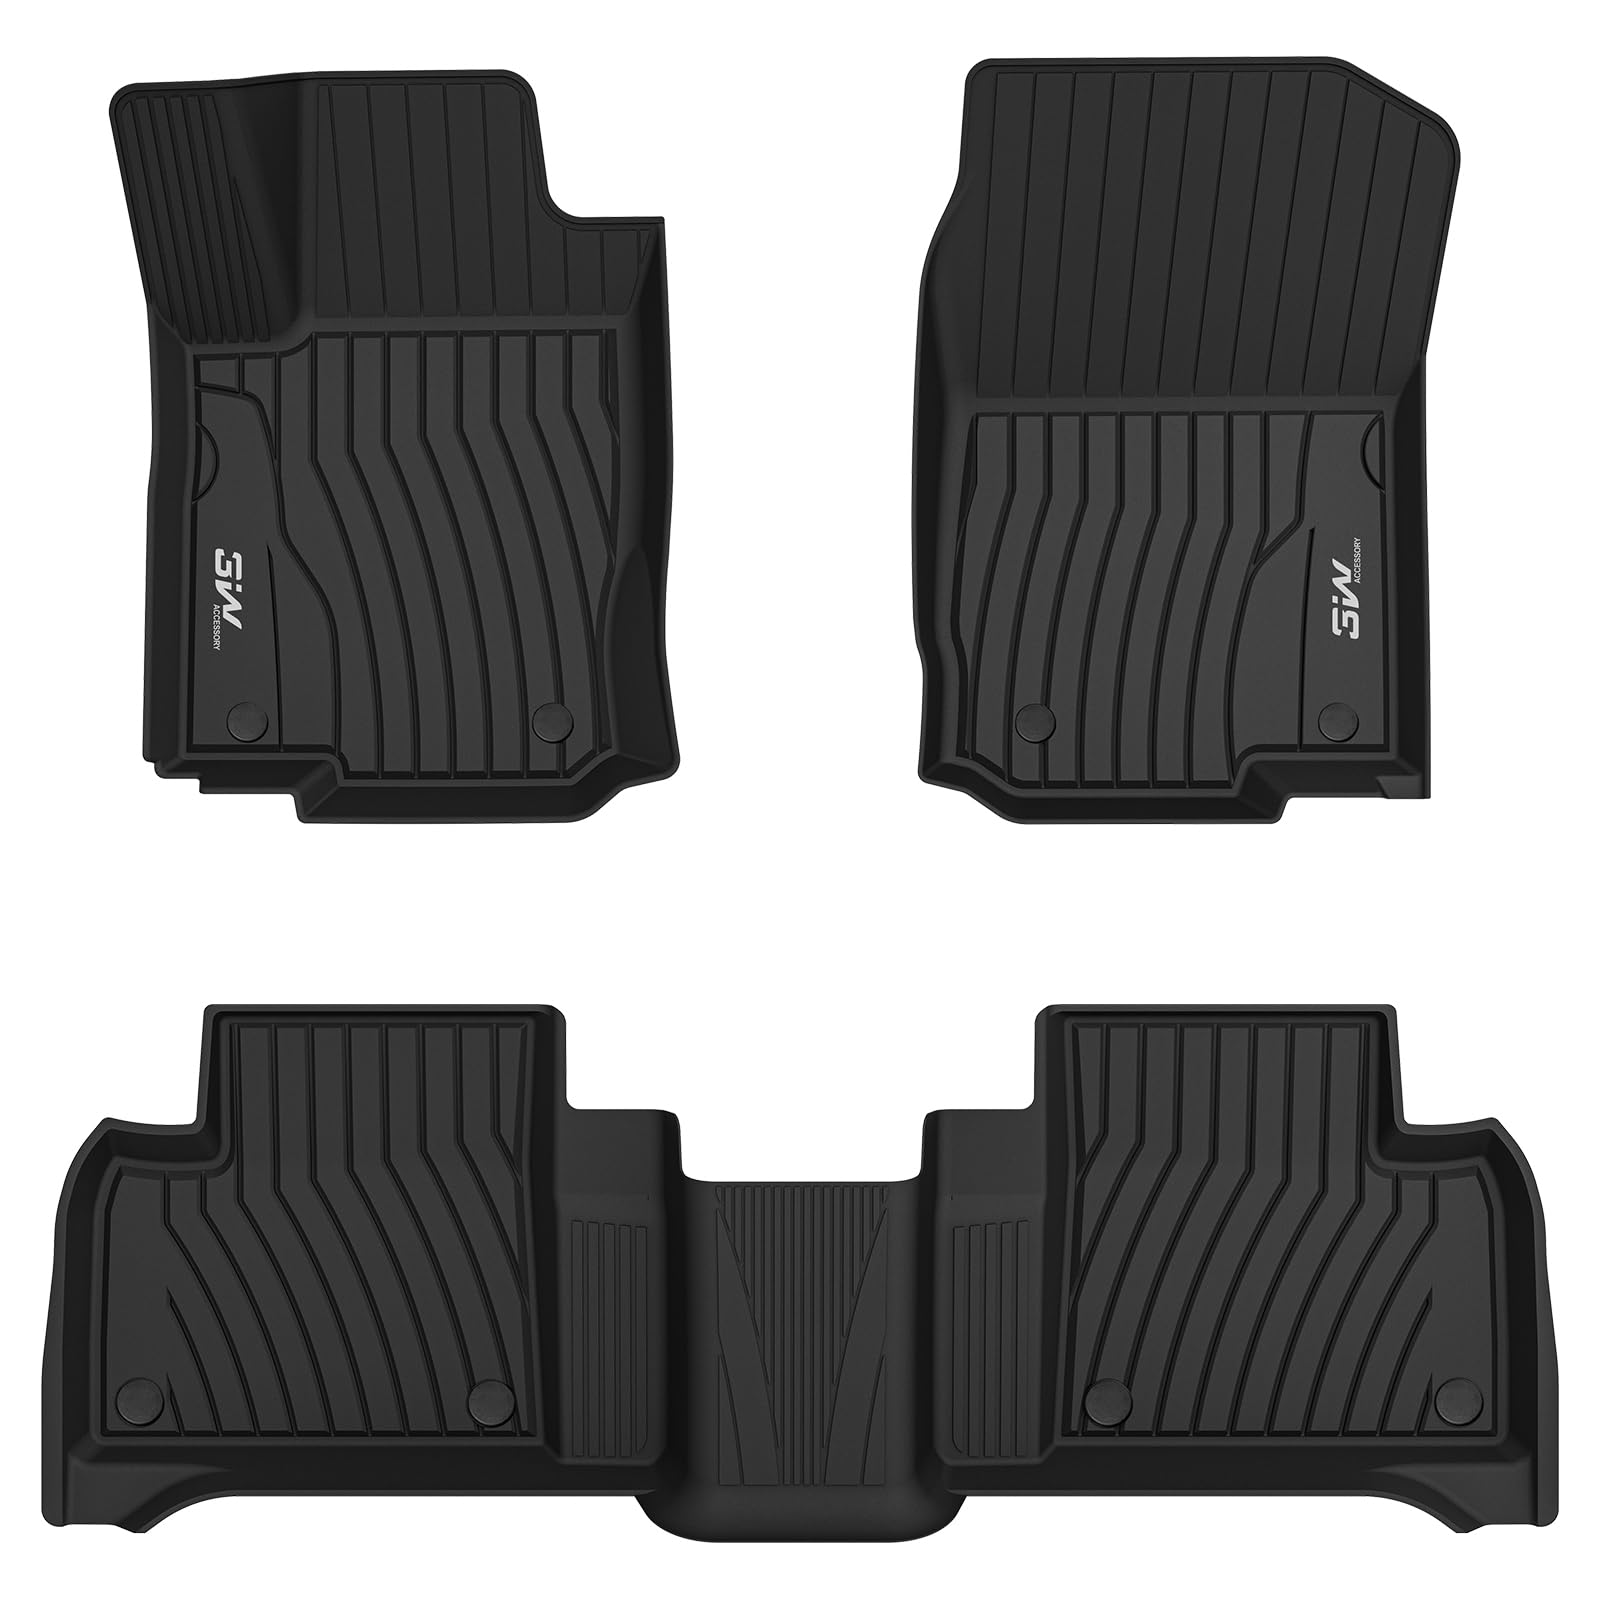 3W Mercedes-Benz ML/GL/GLE/GLS Series 2012-2019 Custom Floor Mats TPE Material & All-Weather Protection Vehicles & Parts 3Wliners 2012-2019 ML/GL/GLE/GLS Series 1st&2nd Row Mats